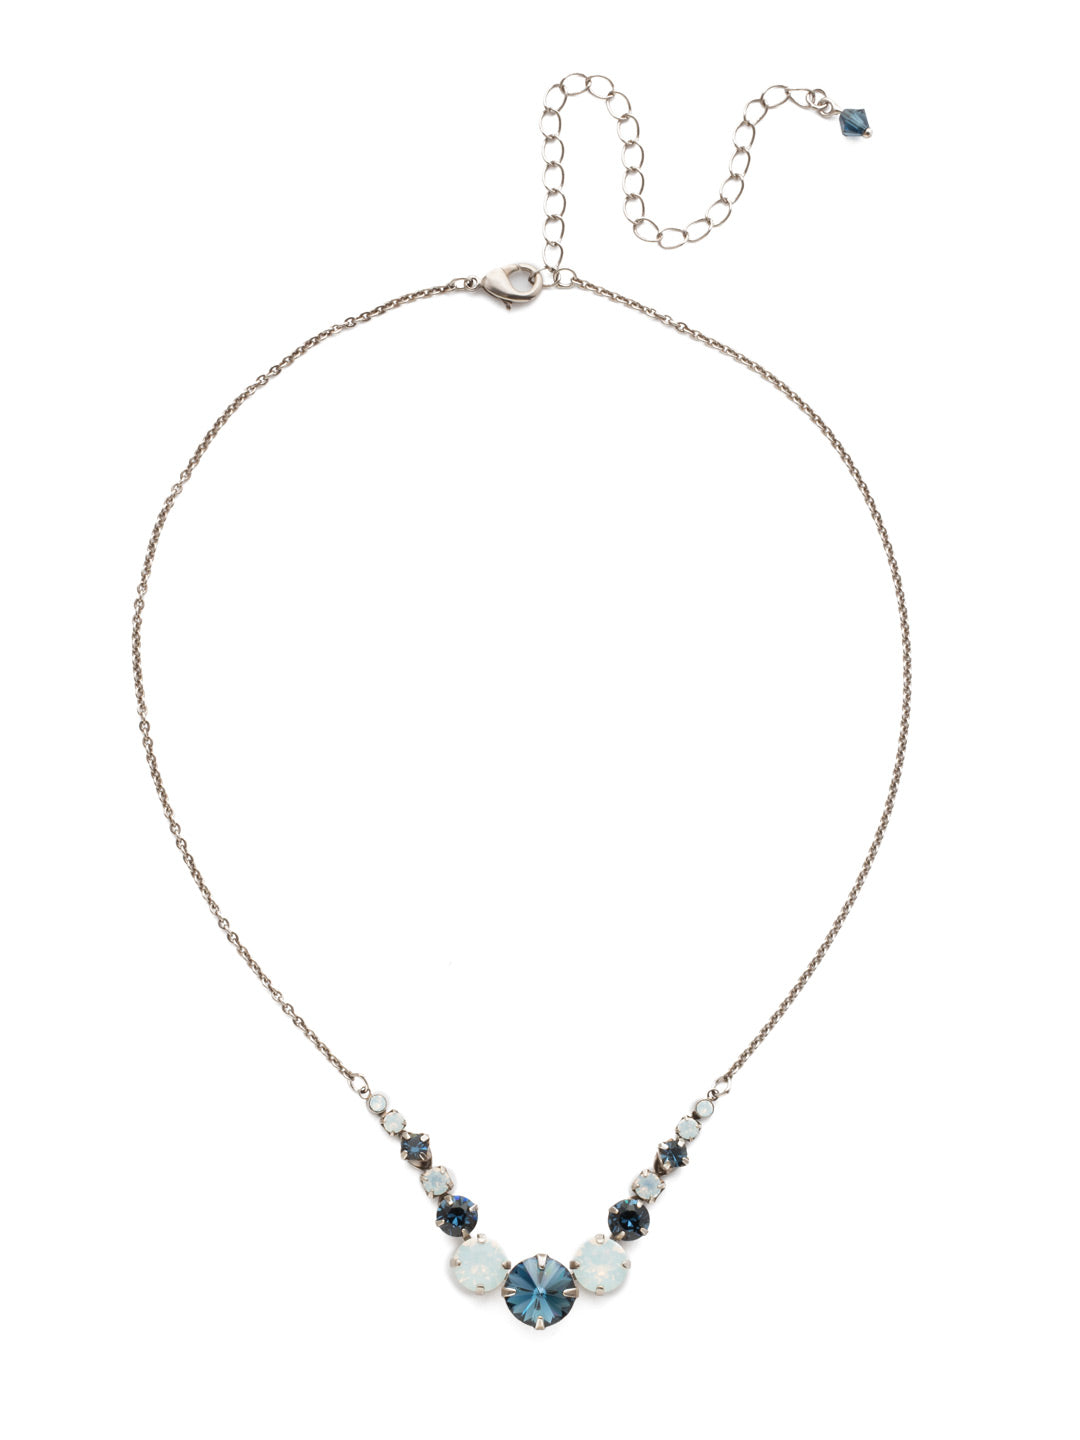 London Tennis Necklace - NCQ14ASGBL - <p>A long, simple chain paired with gorgeous round stones is exactly what every girl needs to dress things up. This round stone necklace is perfect for layering, or to just wear alone. Let the simple sparkle take over. From Sorrelli's Glory Blue collection in our Antique Silver-tone finish.</p>